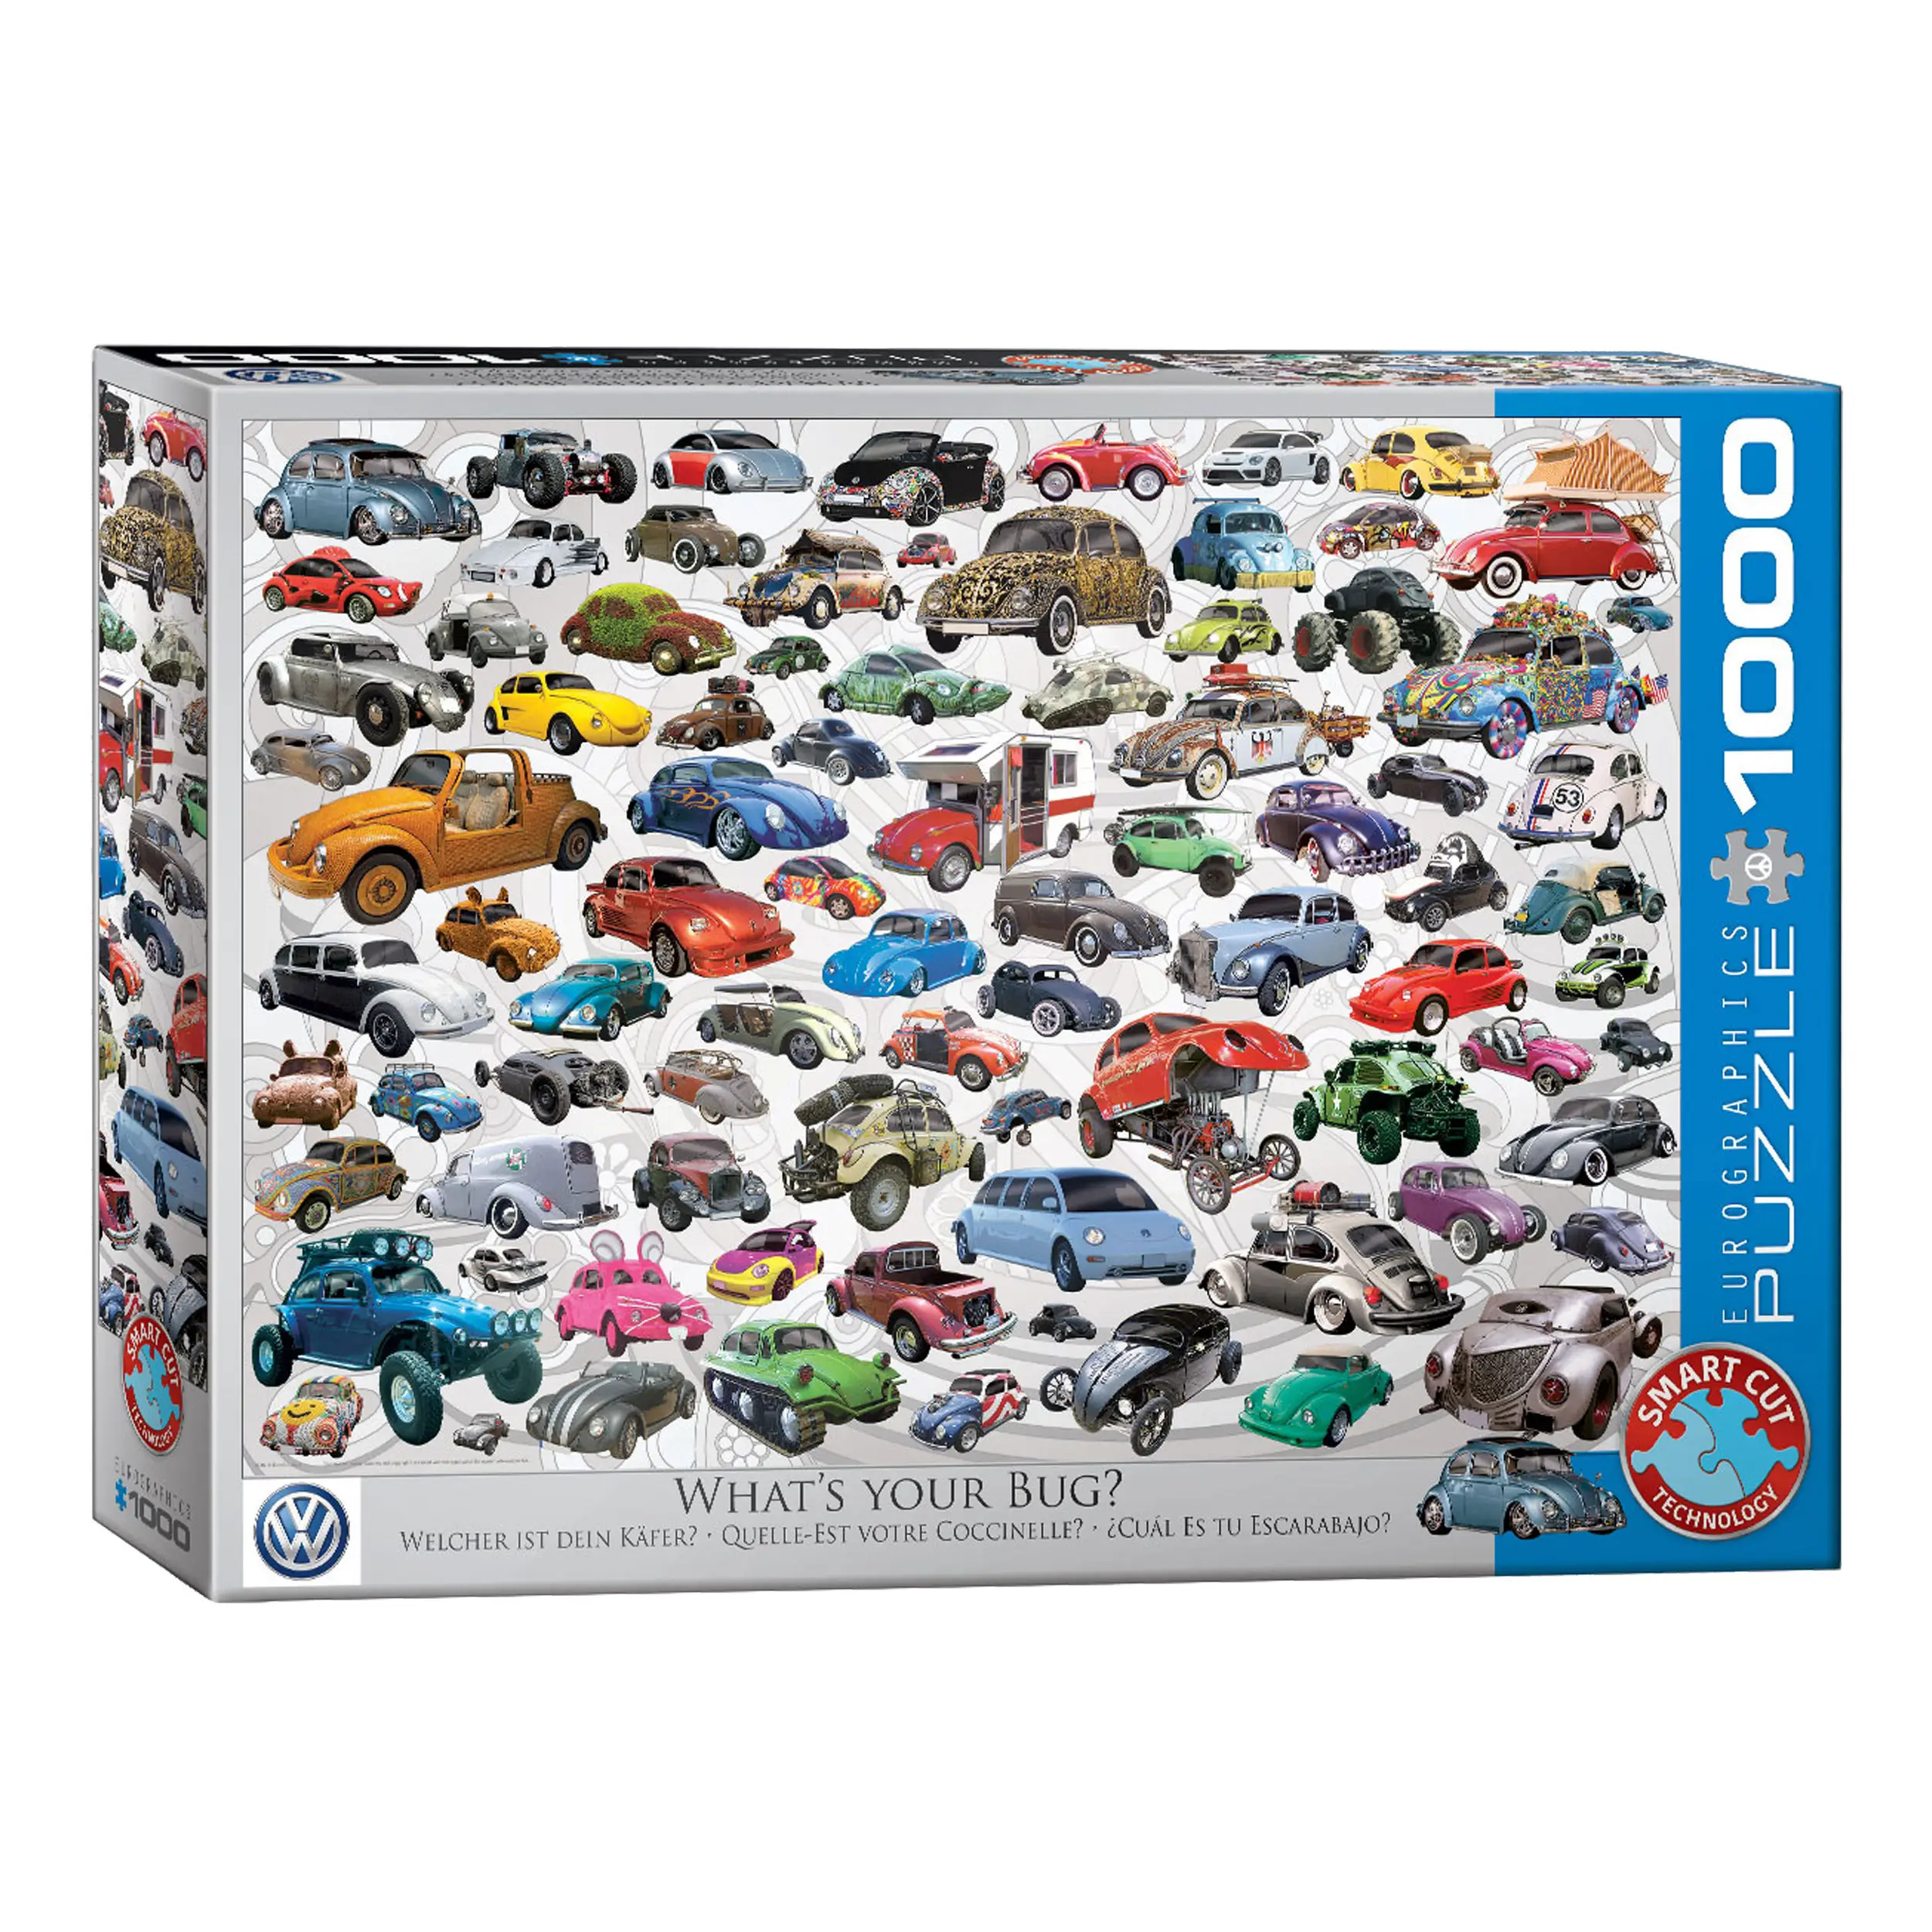 Puzzle VW your Bug K盲fer Whats